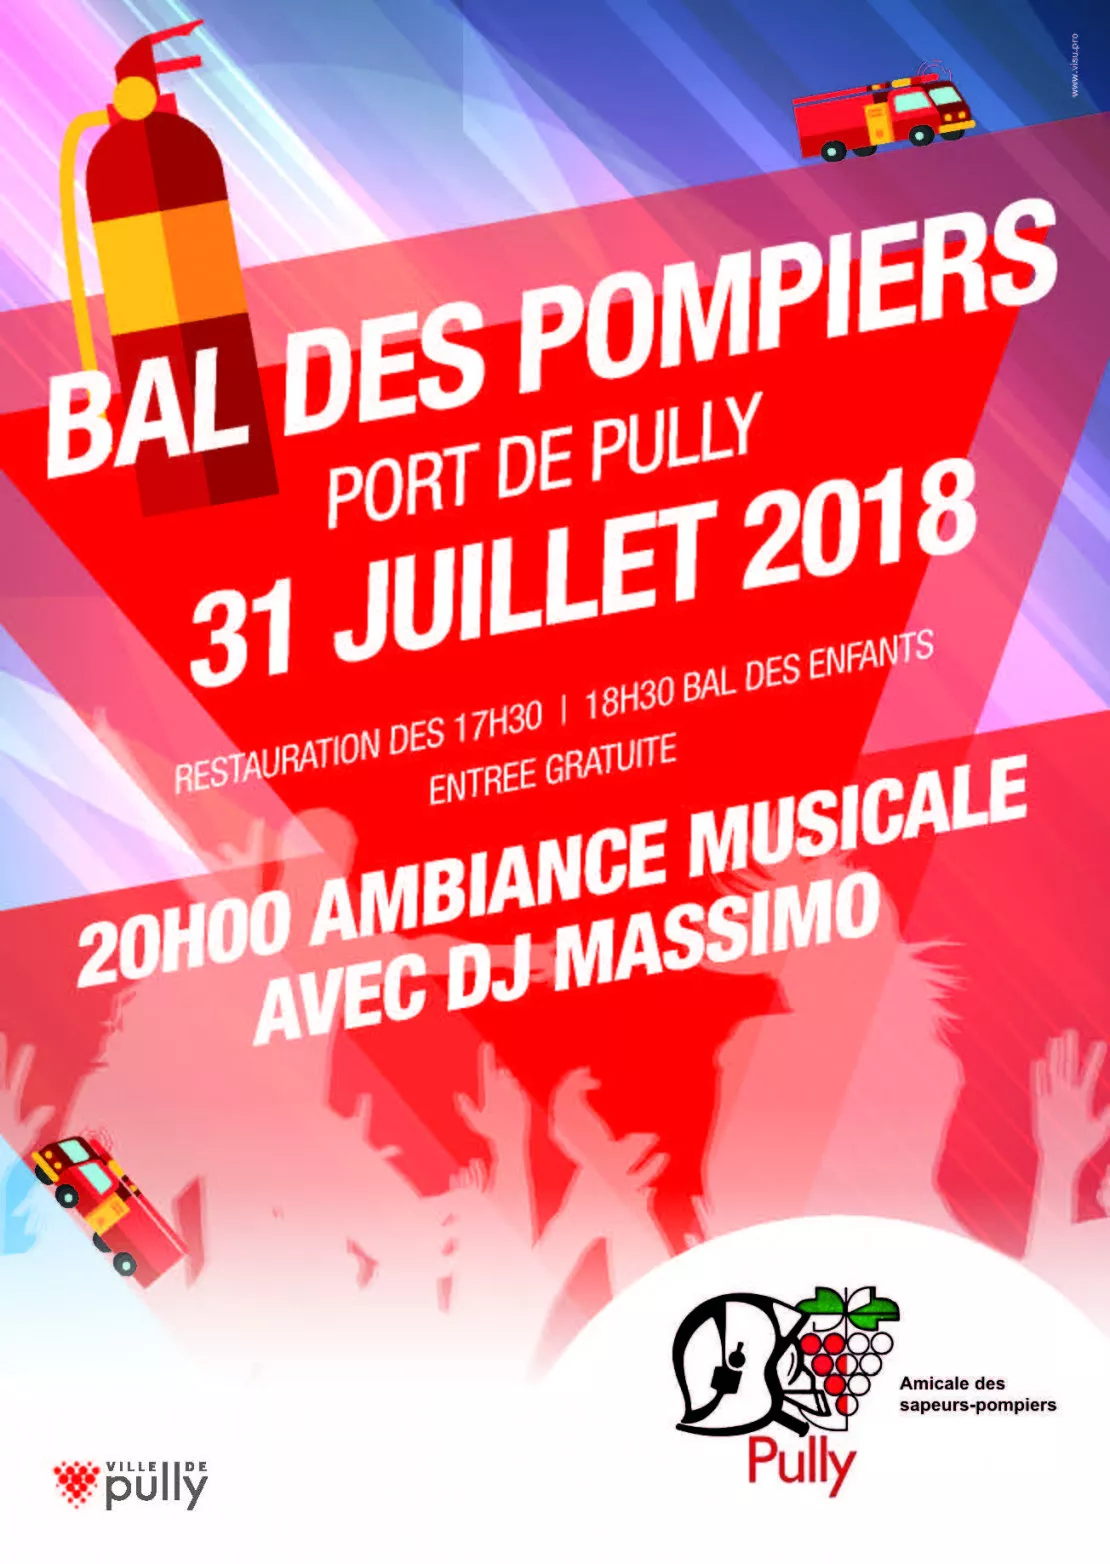 Pully (CH) - bal des Pompiers